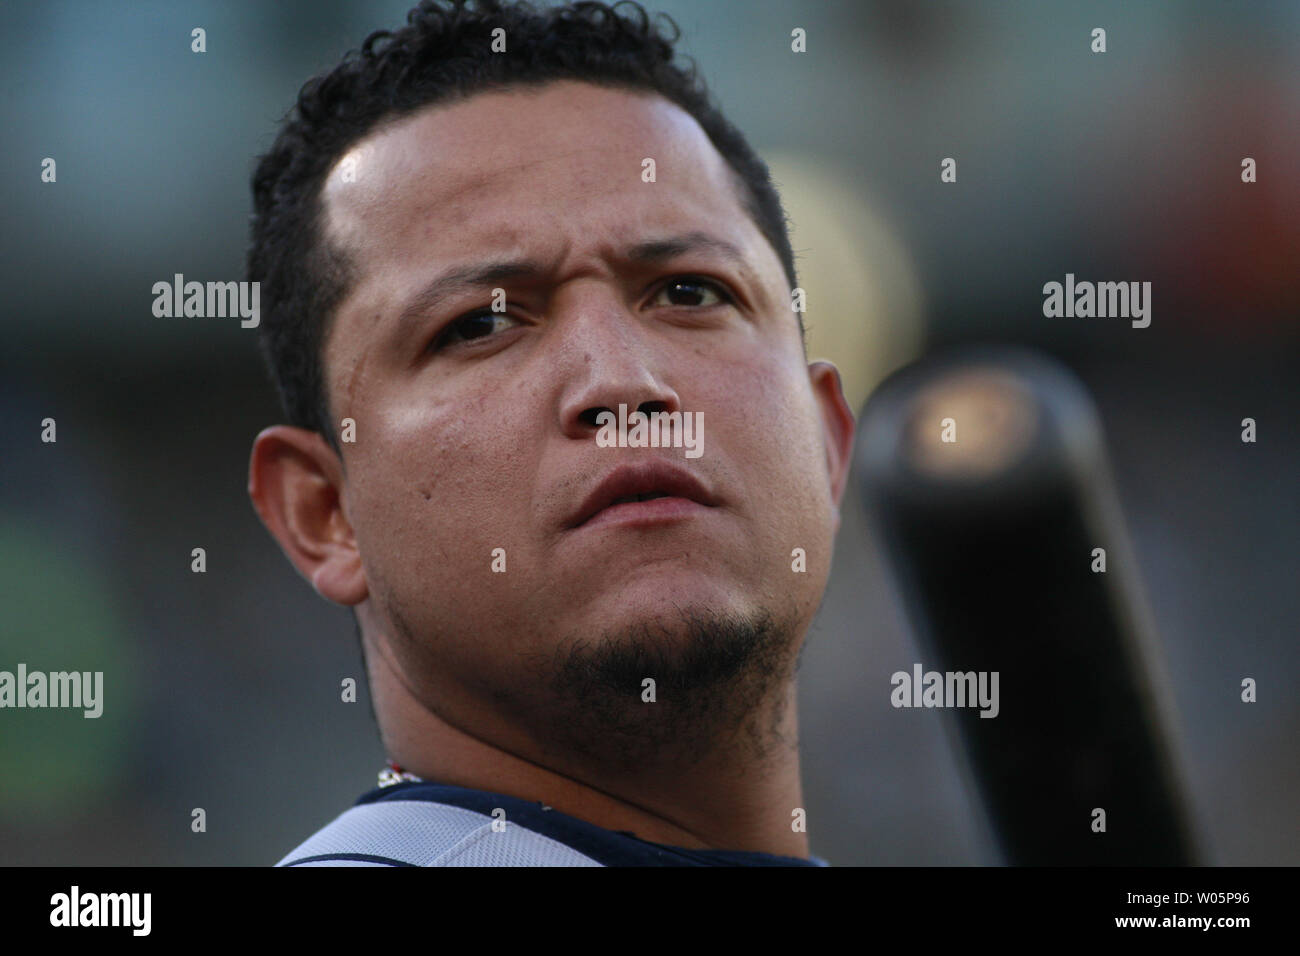 Detroit Tigers Miguel Cabrera waits in the ond deck circle to bat against the Oakland A's in game 5 of the American League Division Series at O.co Coliseum in Oakland, California on October 10, 2013.     UPI/Bruce Gordon Stock Photo